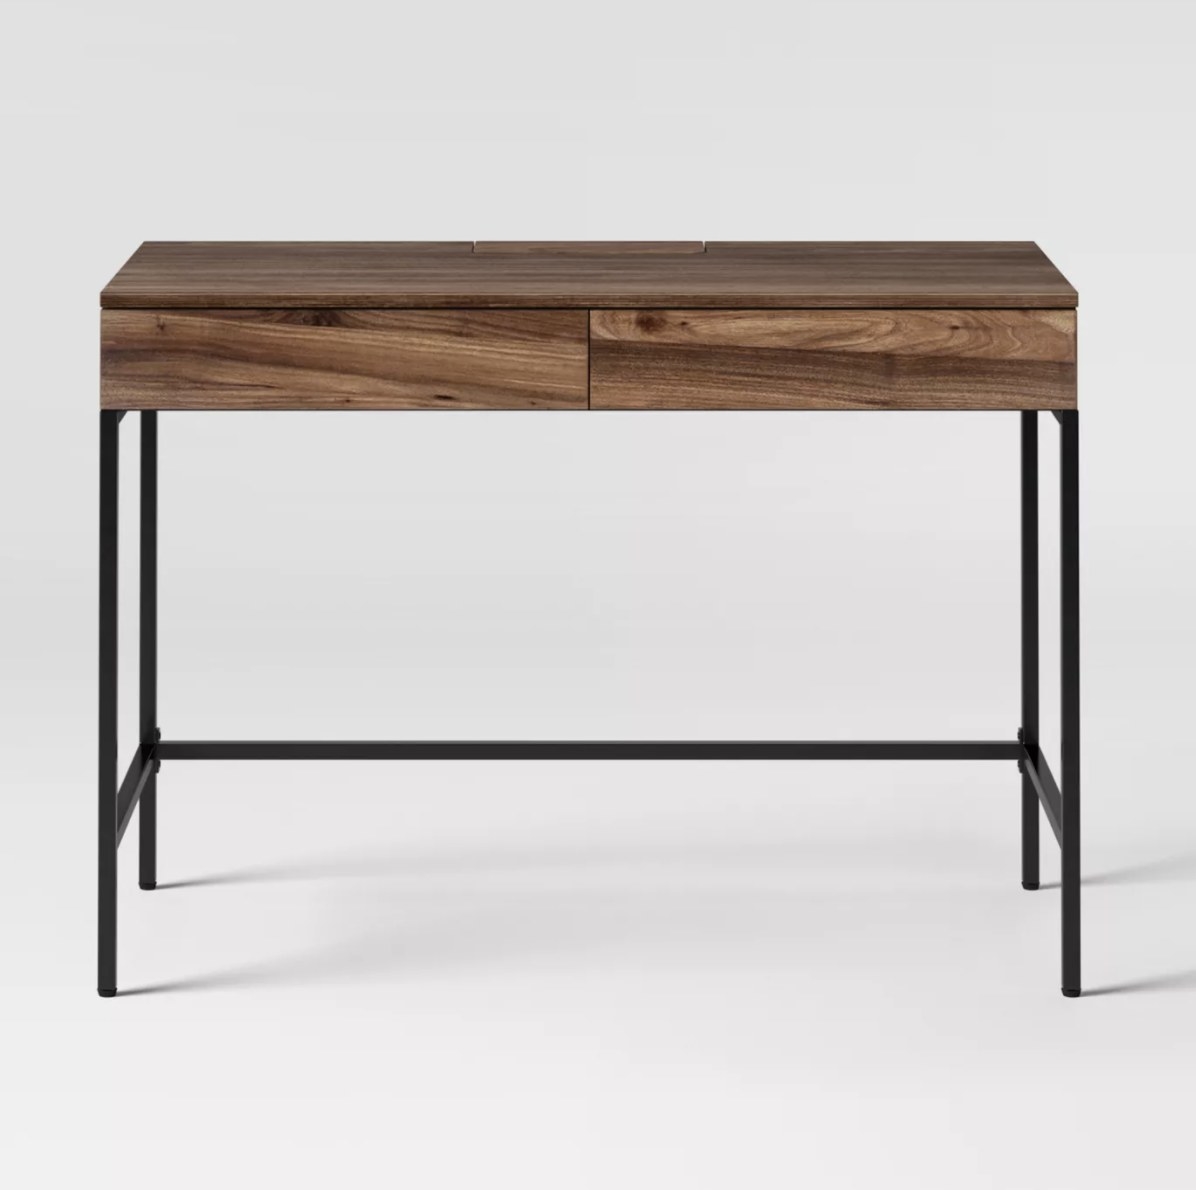 The brown wooden desk has long black legs connected at the bottom